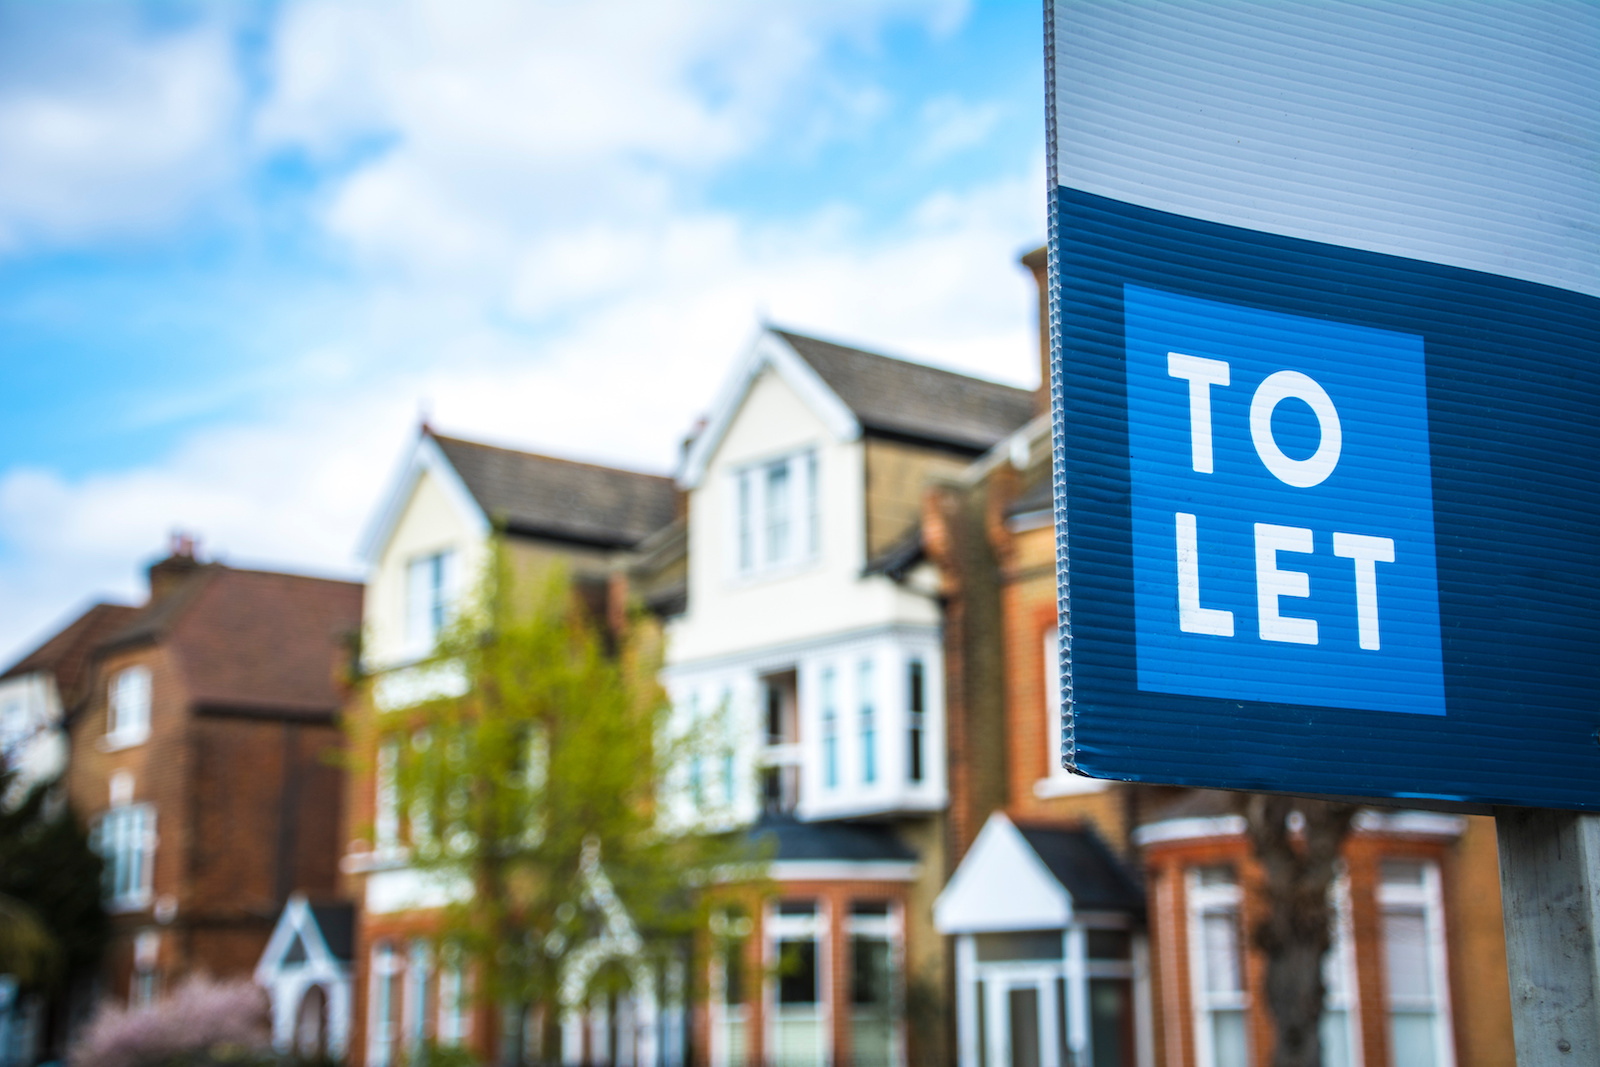 'To Let' sign on a street with houses